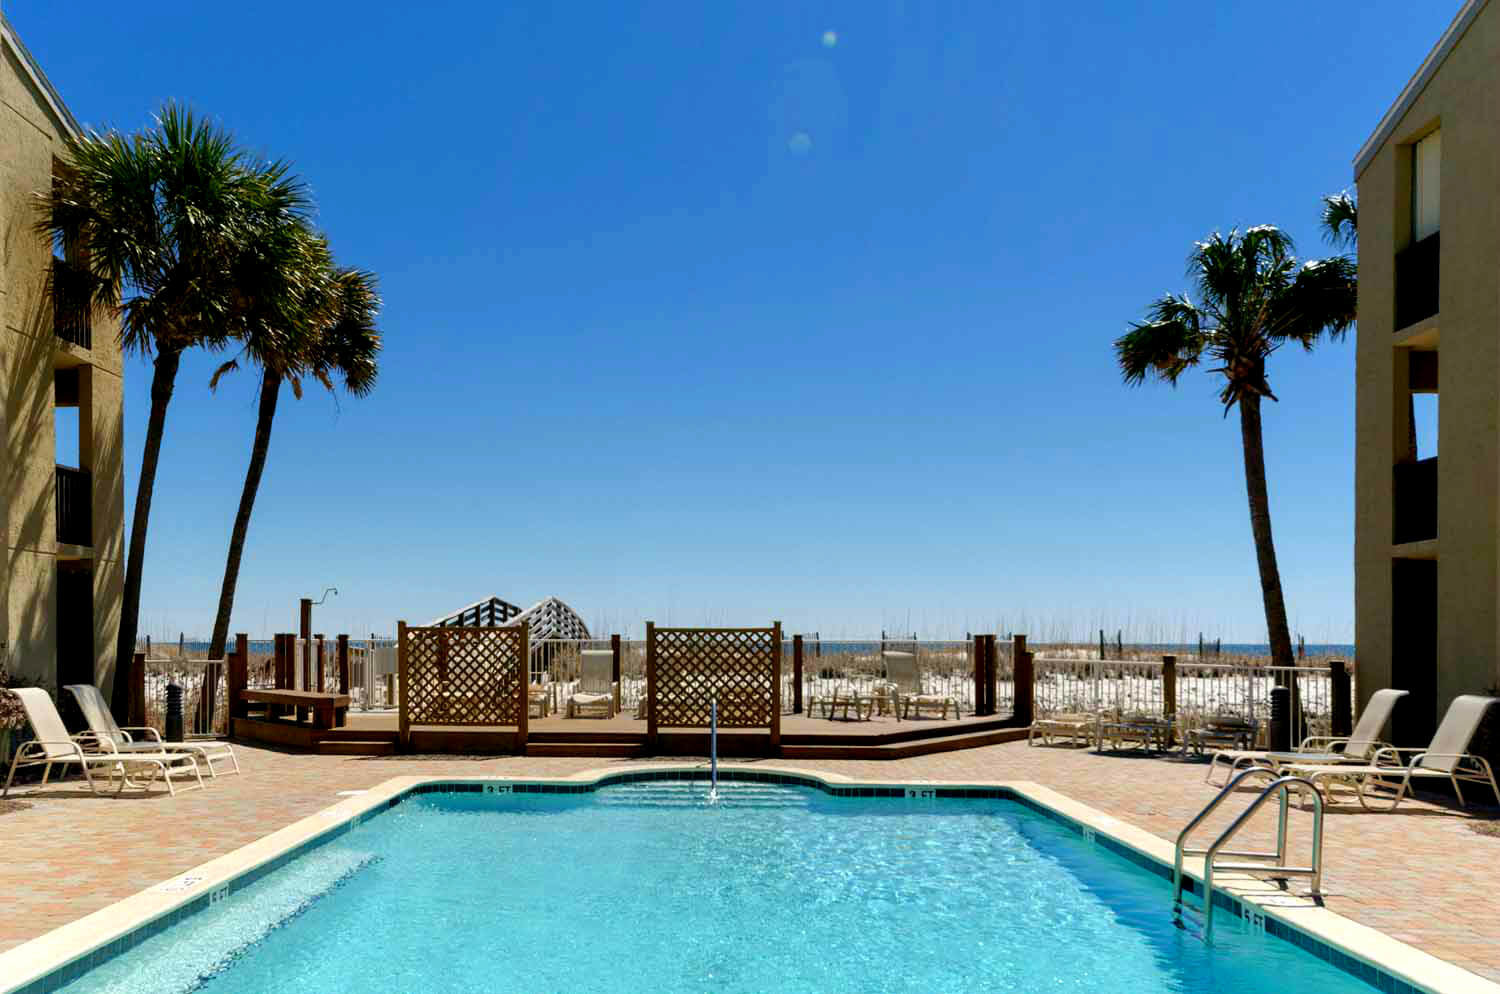 Swim some laps in the outdoor pool at Shipwatch condos in Perdido Key